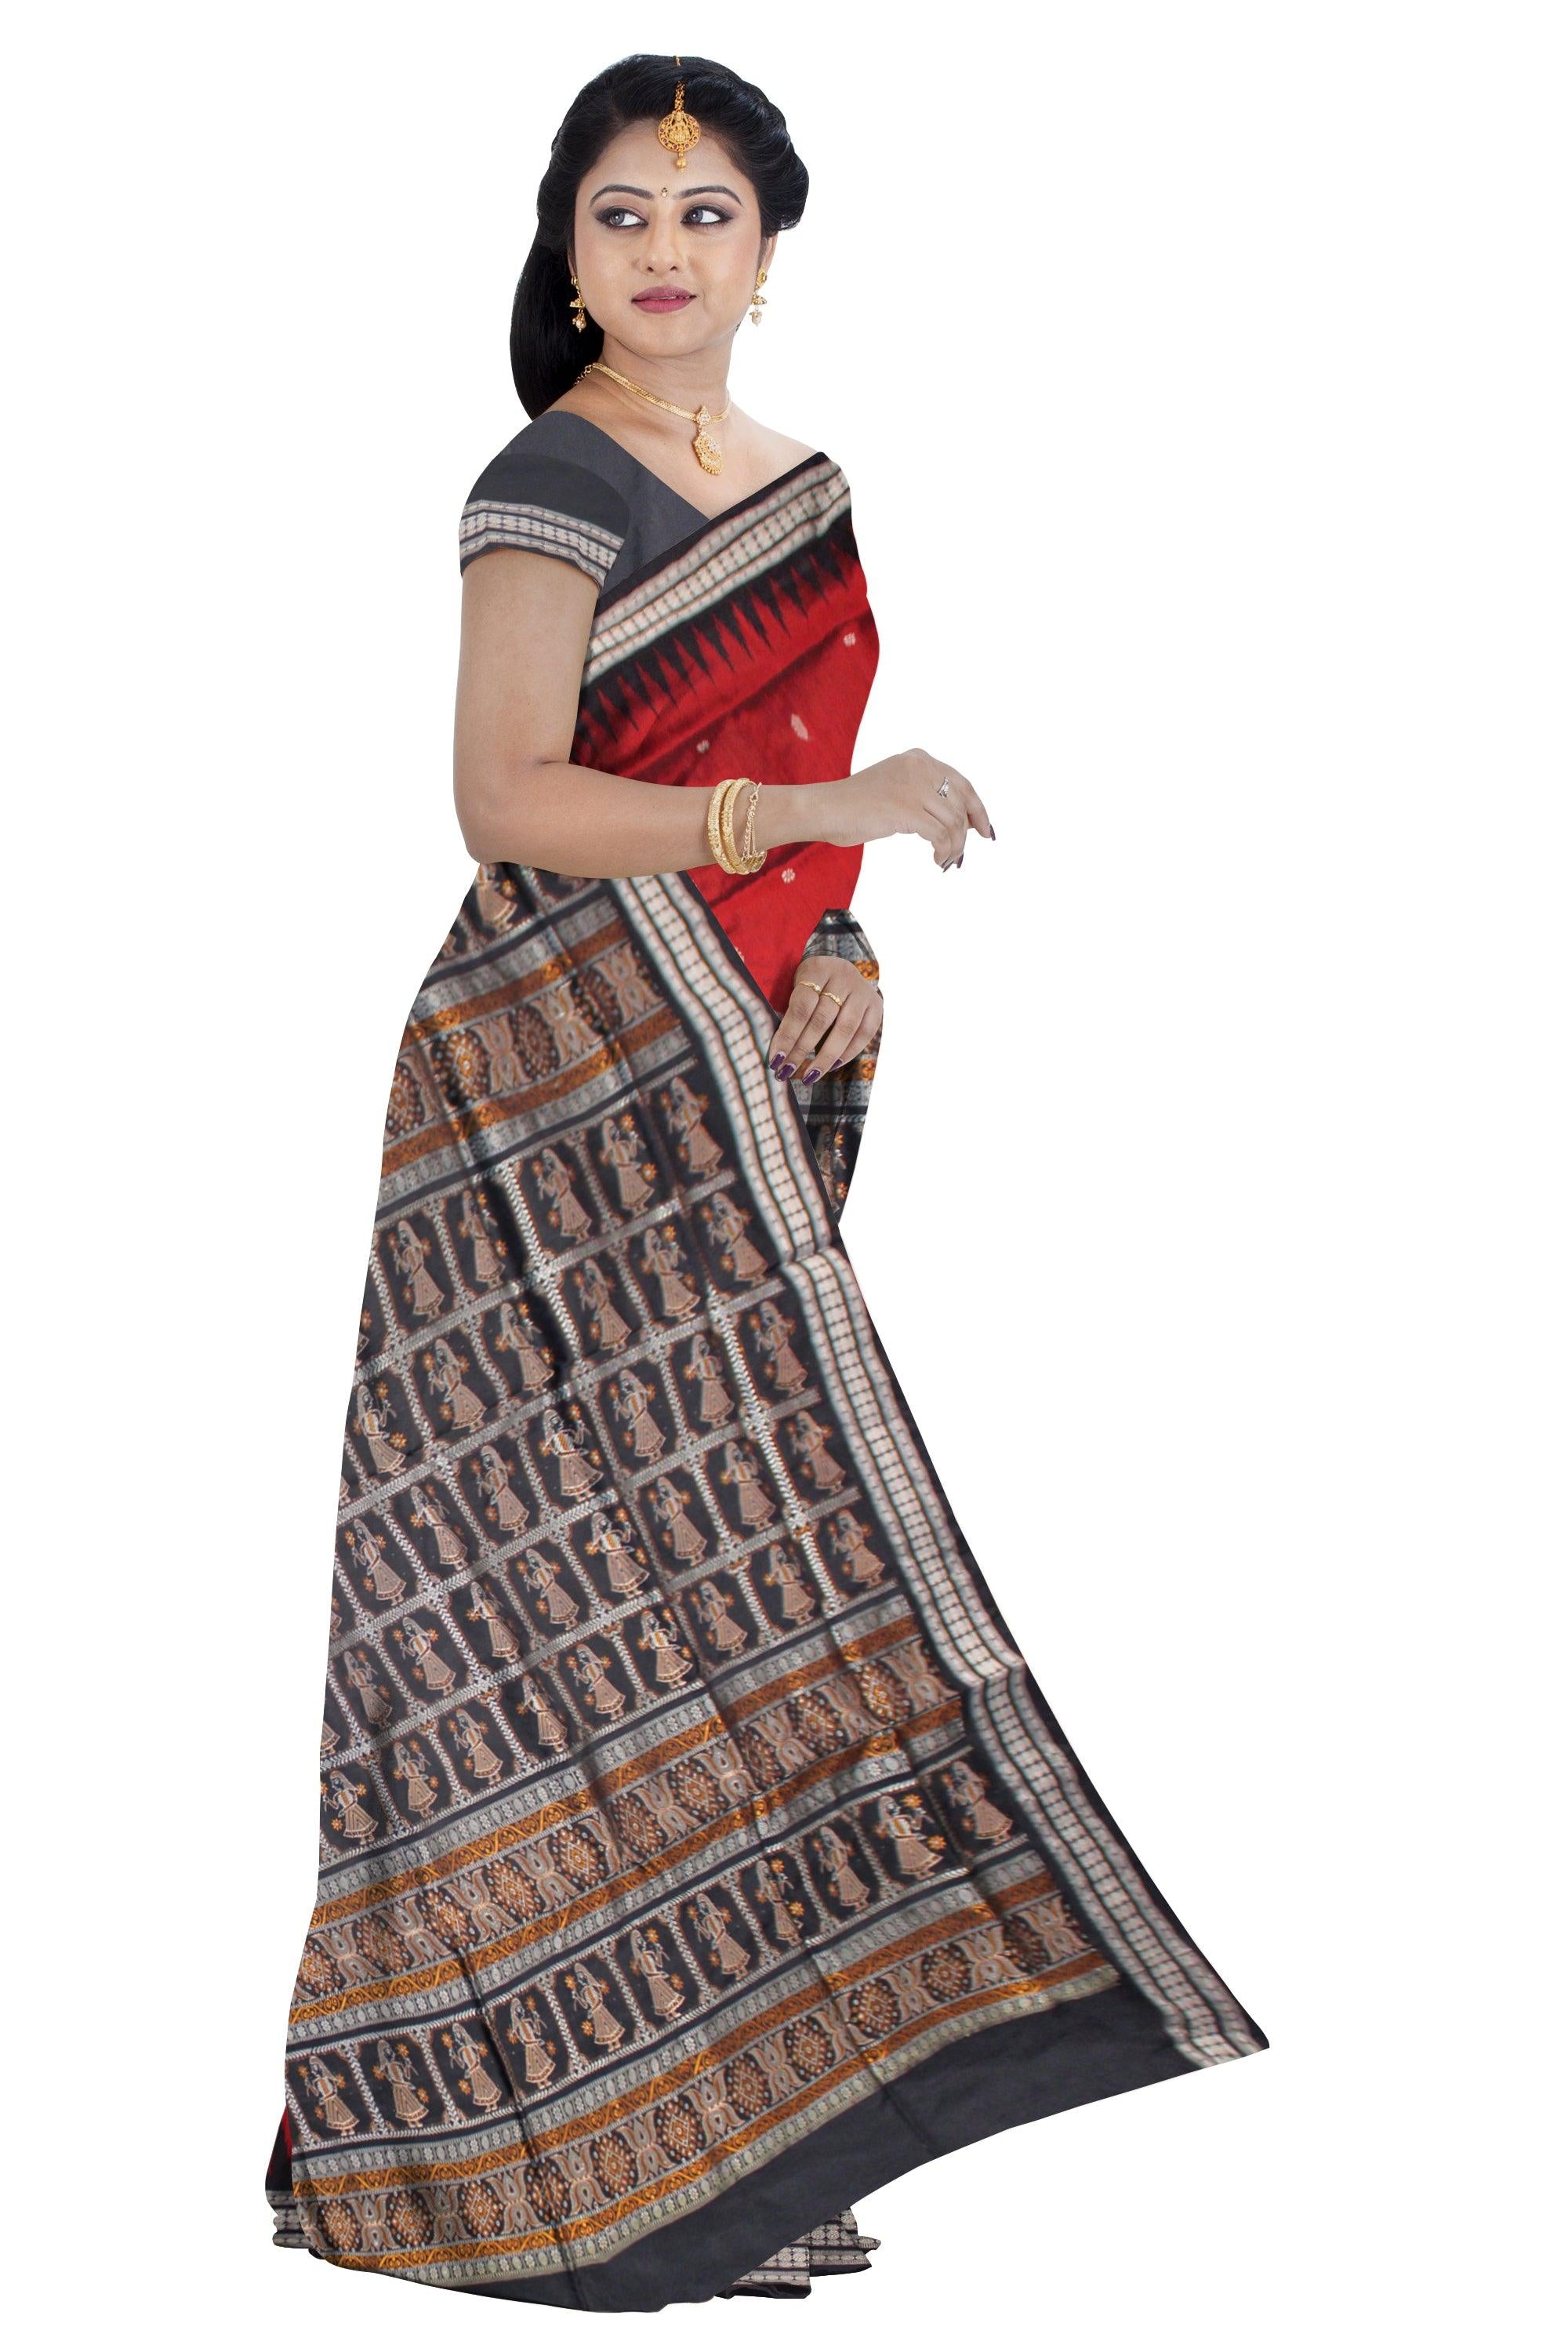 A NEW DESIGN OF SONEPUR PATLI SAREE IN MAROON AND BLACK COLOR, WITH BLOUSE PIECE. - Koshali Arts & Crafts Enterprise